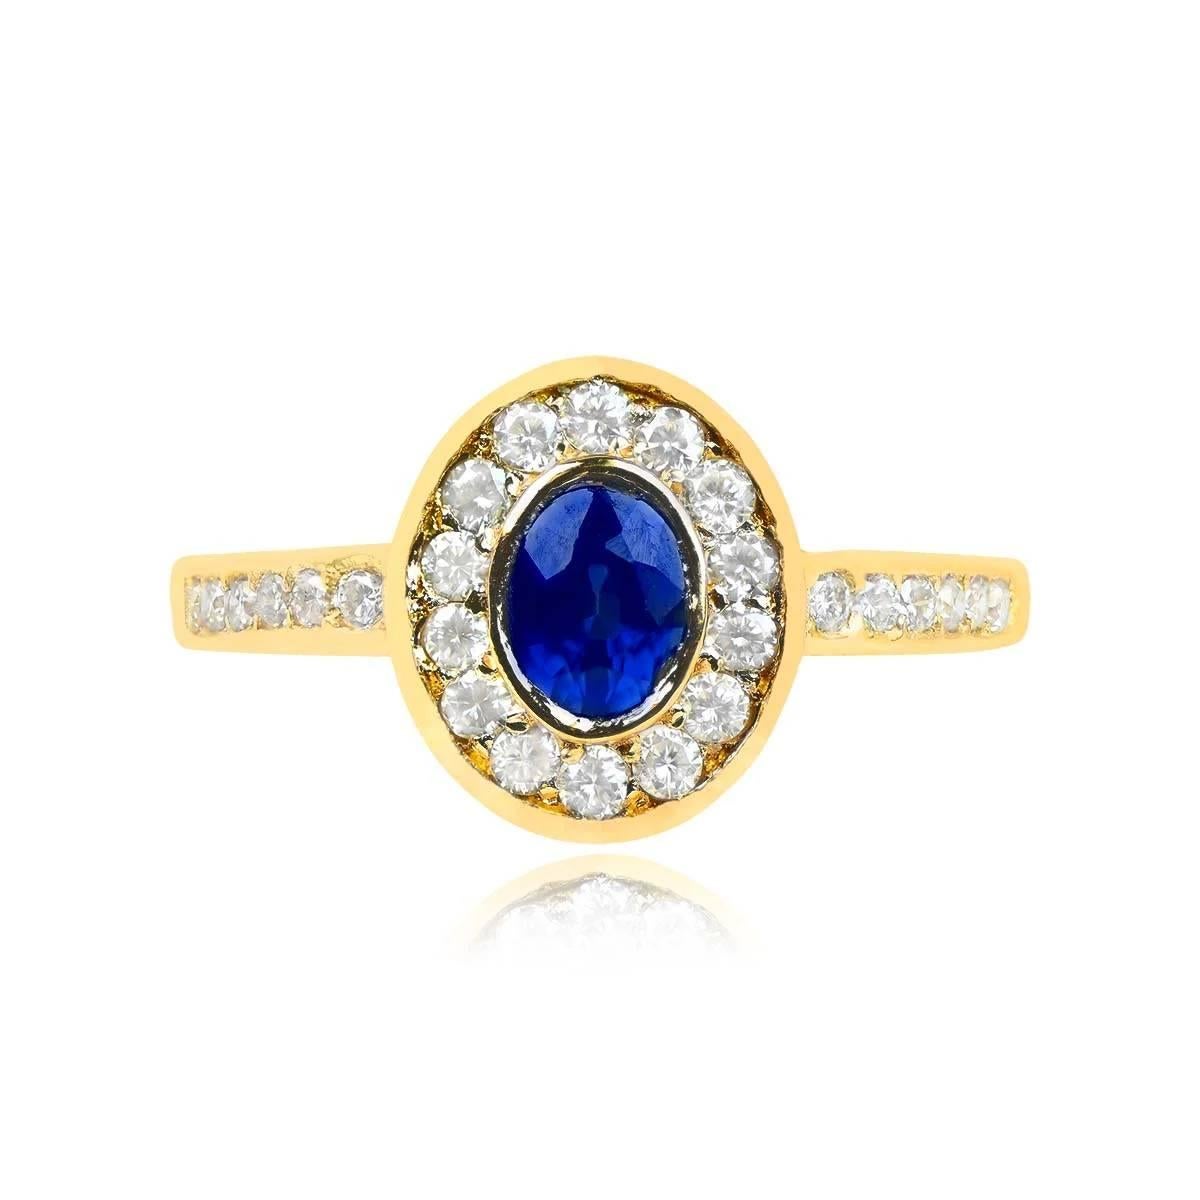 An enchanting vintage French ring showcasing a bezel-set 0.40-carat oval-cut sapphire at the center, surrounded by a halo of round brilliant cut diamonds. The shoulders are adorned with six additional round brilliant-cut diamonds on each side, with